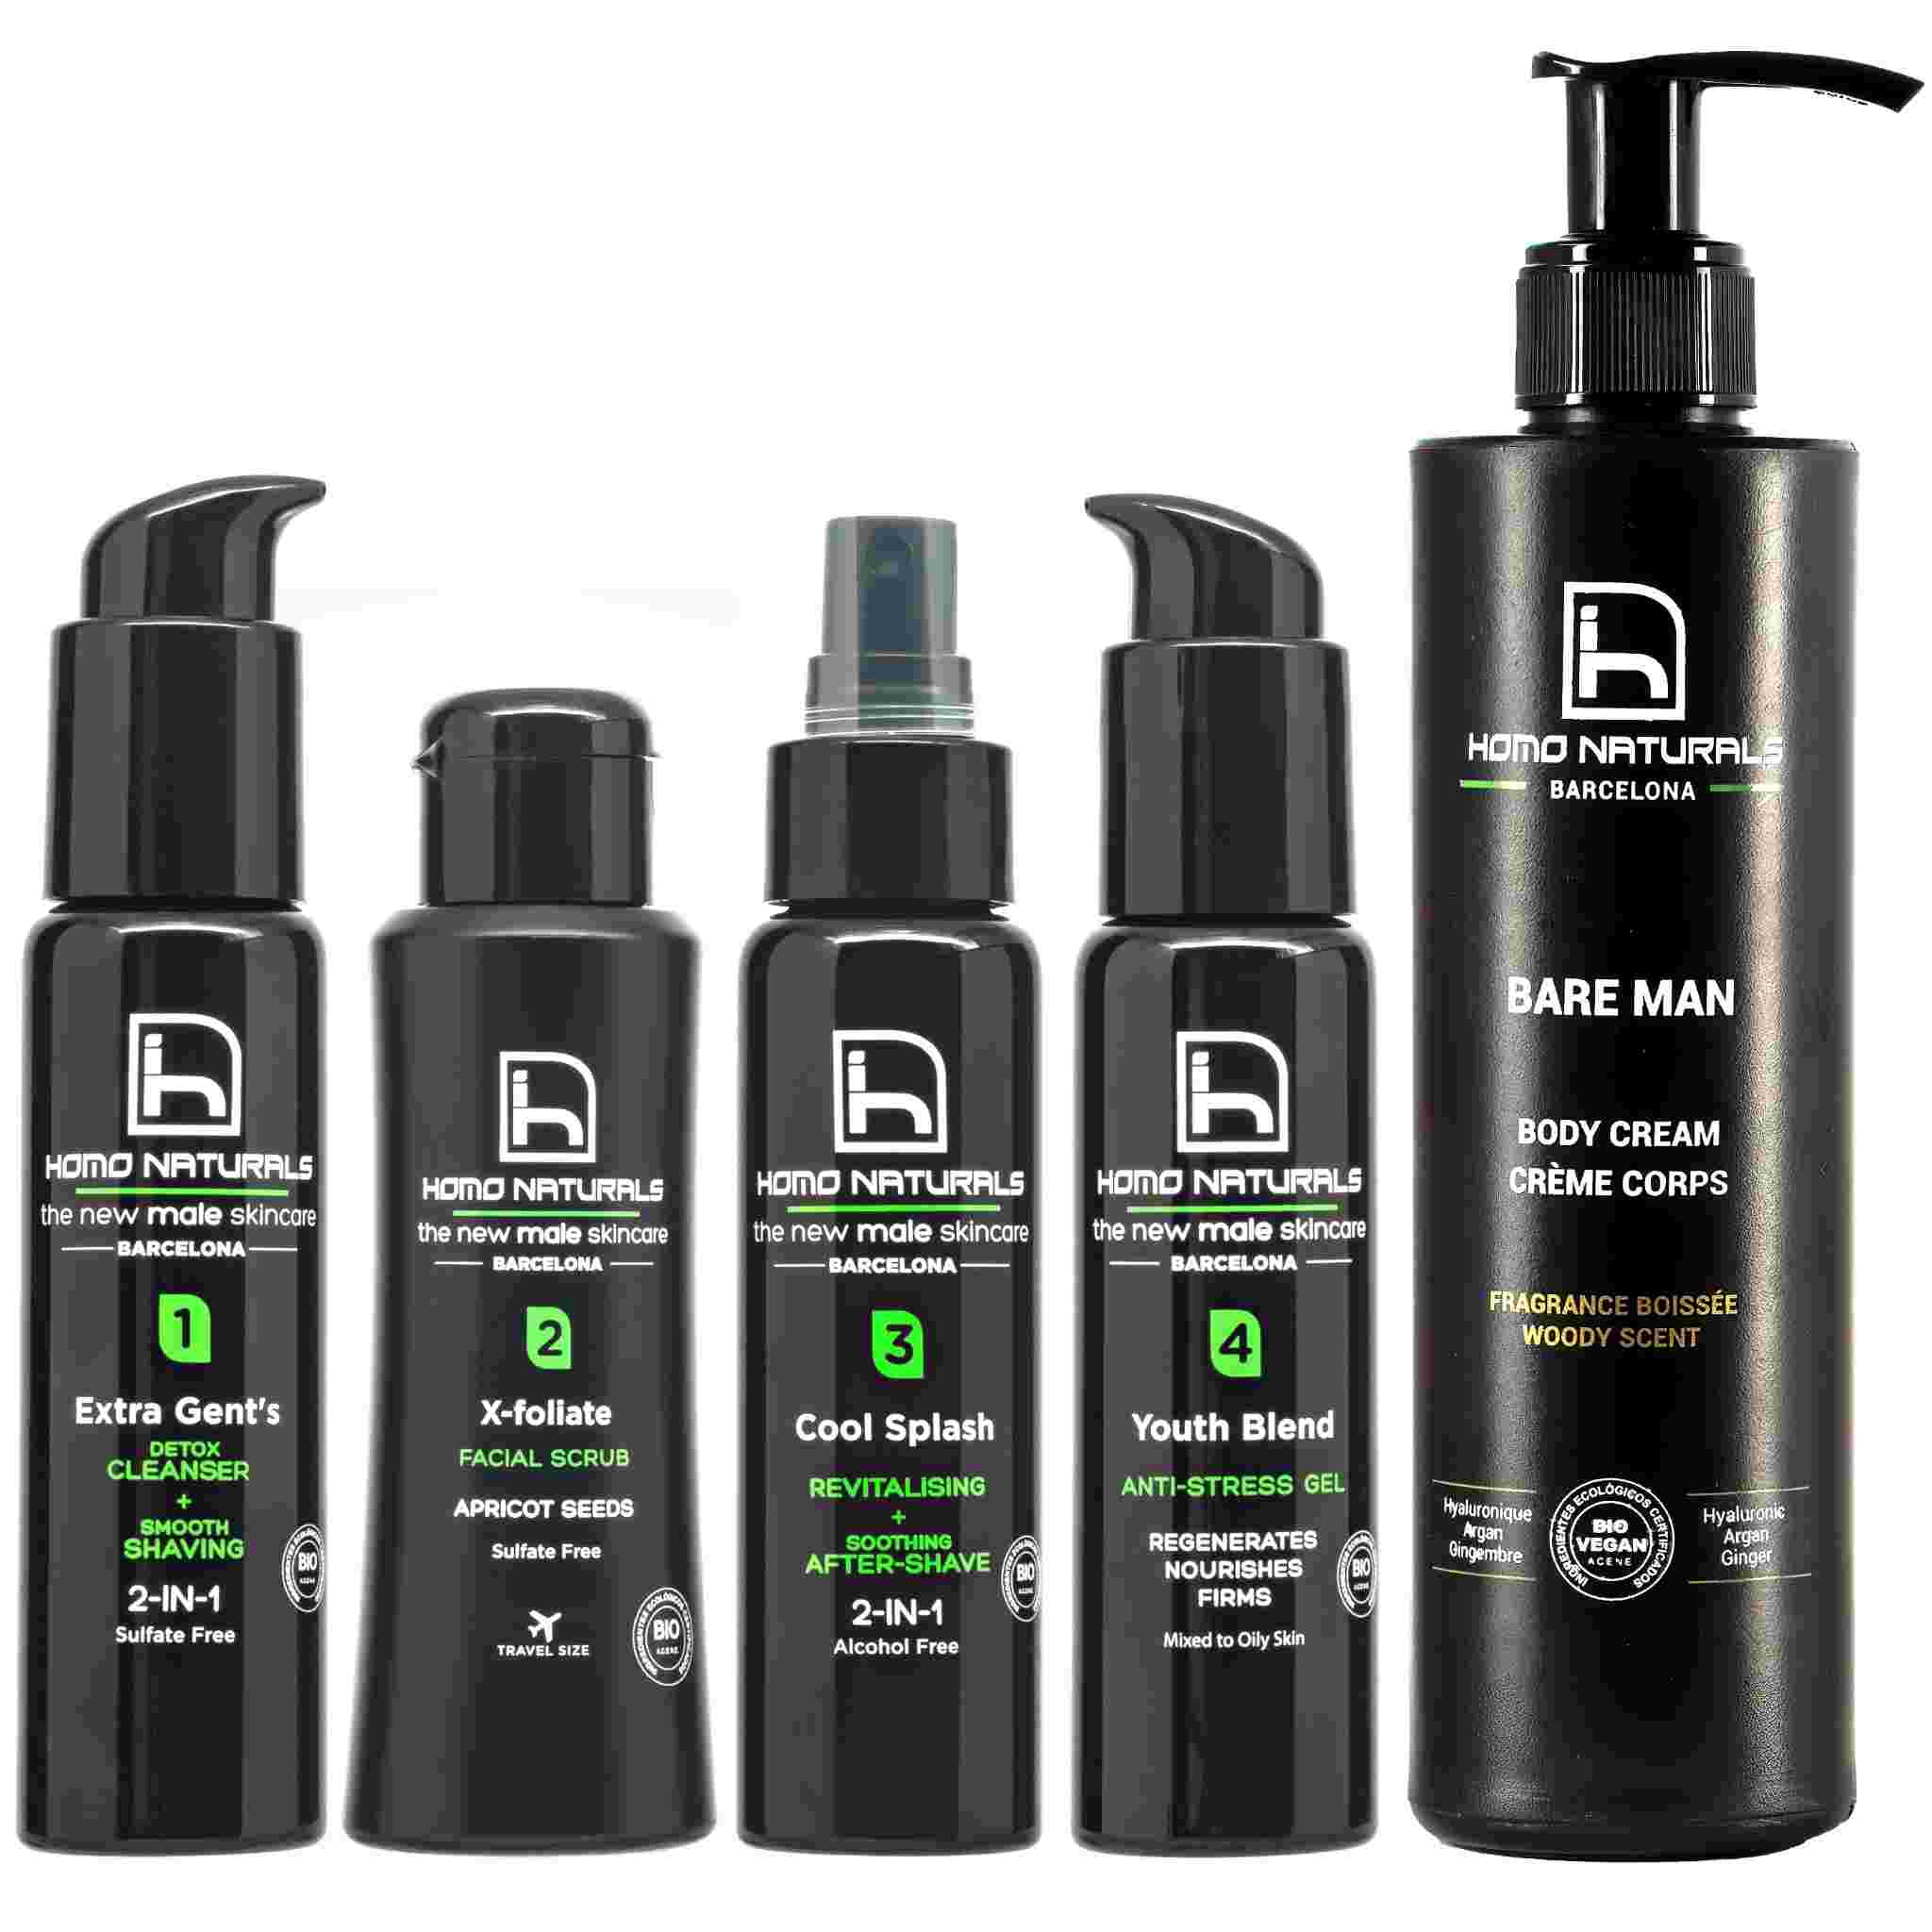 Facial care kit for men with anti-wrinkle facial treatment for oily skin and body cream